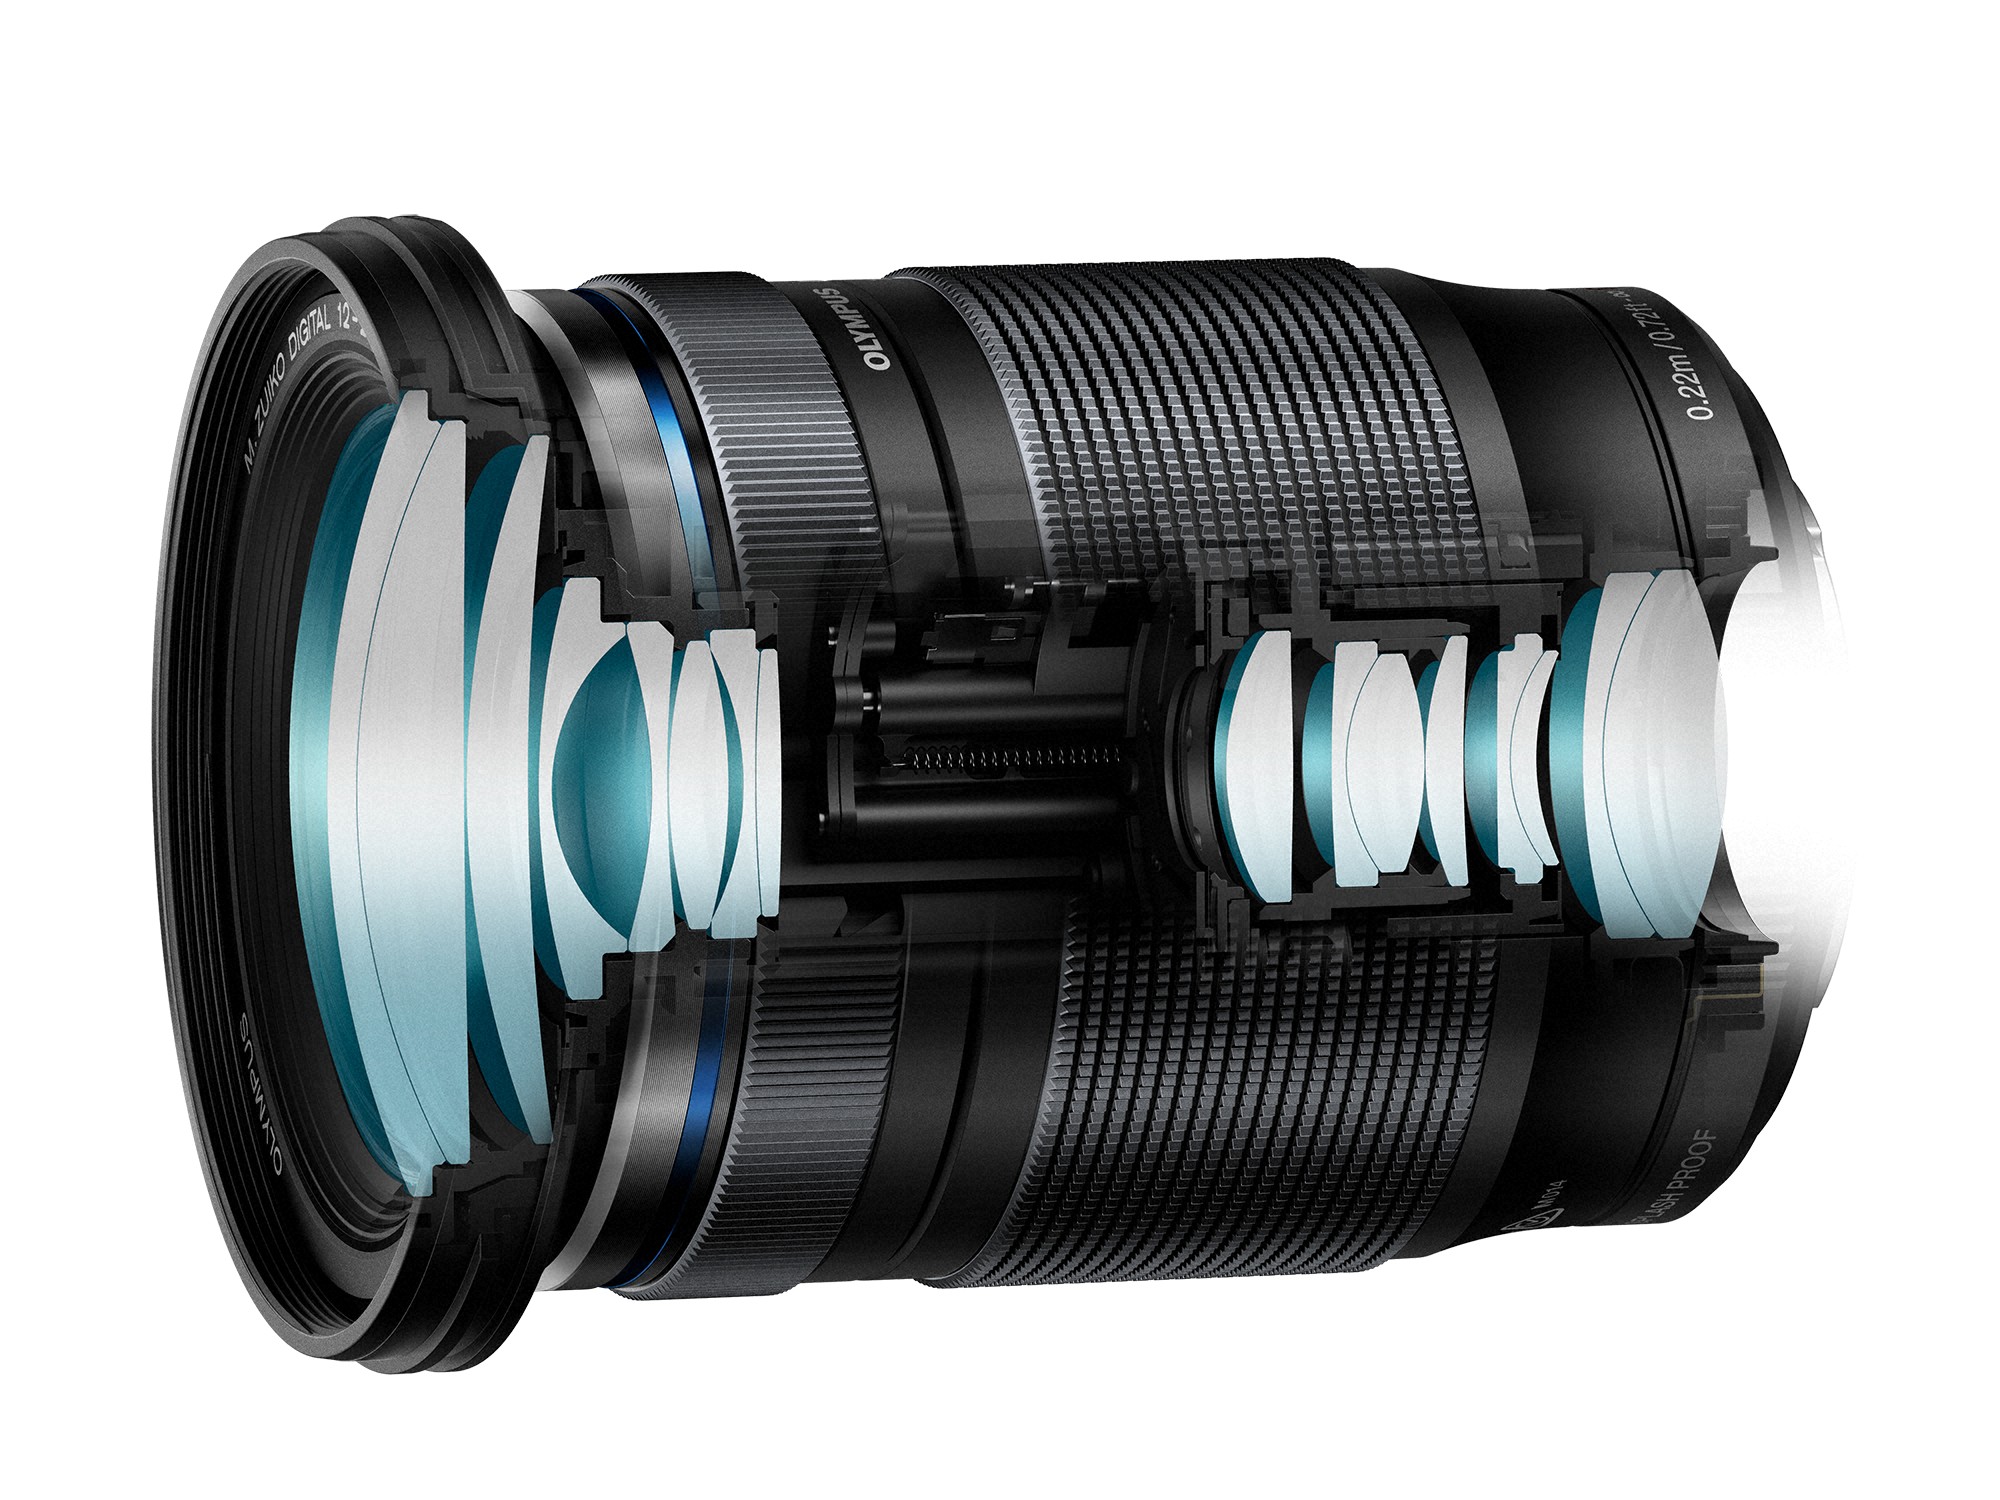 The Olympus M.Zuiko 12-200mm f3.5-6.3 Has a Staggering 16.6x Zoom